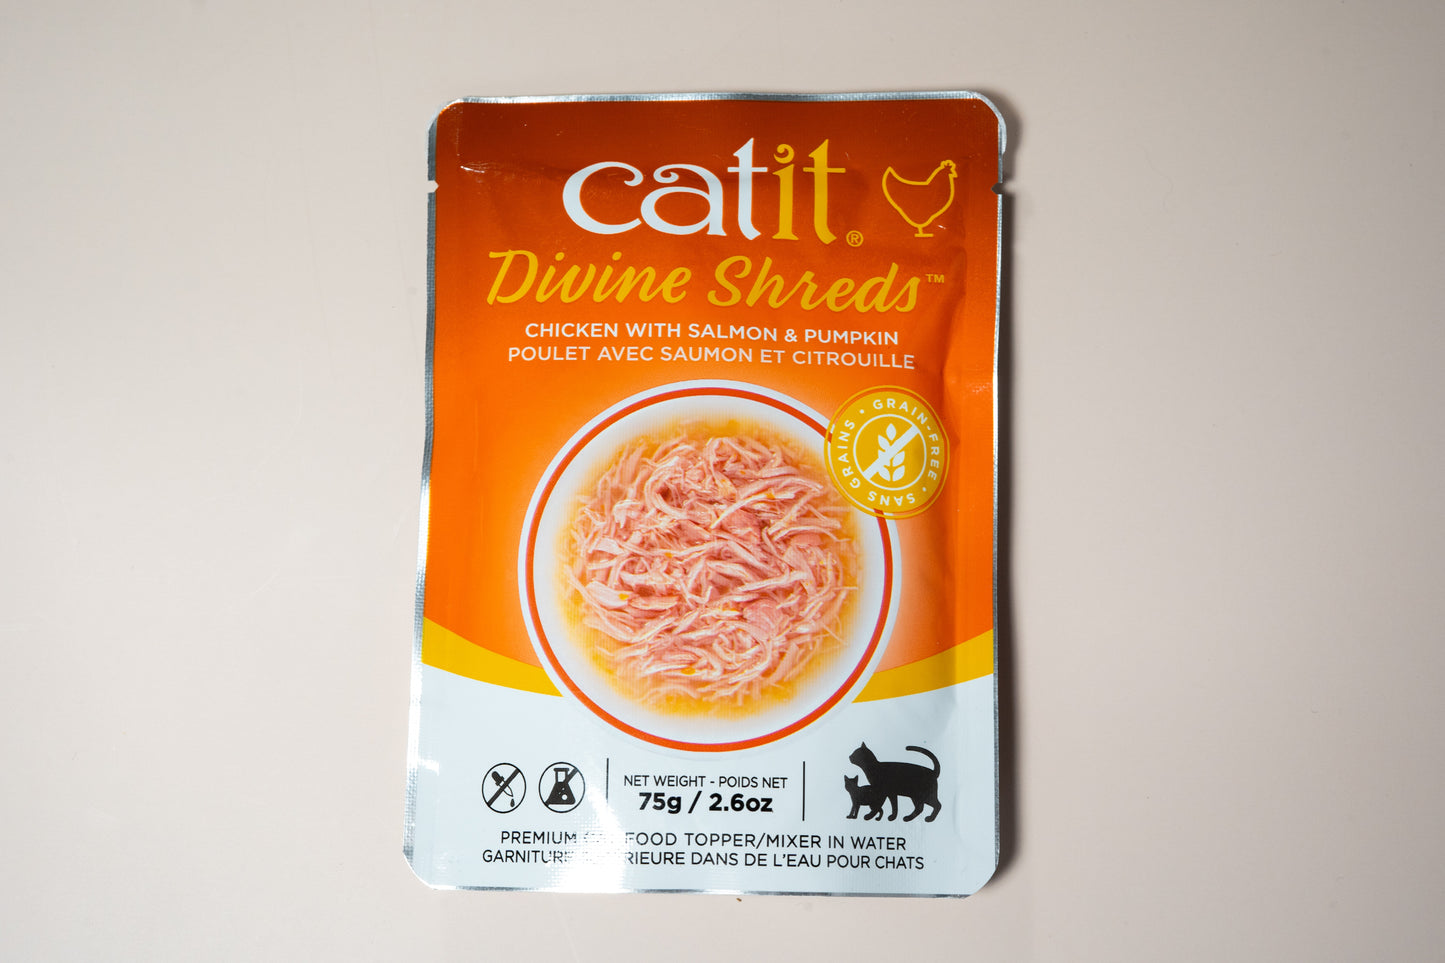 Front view of the Catit Divine Shreds food tooper in water with chicken, salmon and pumpkin flavor.